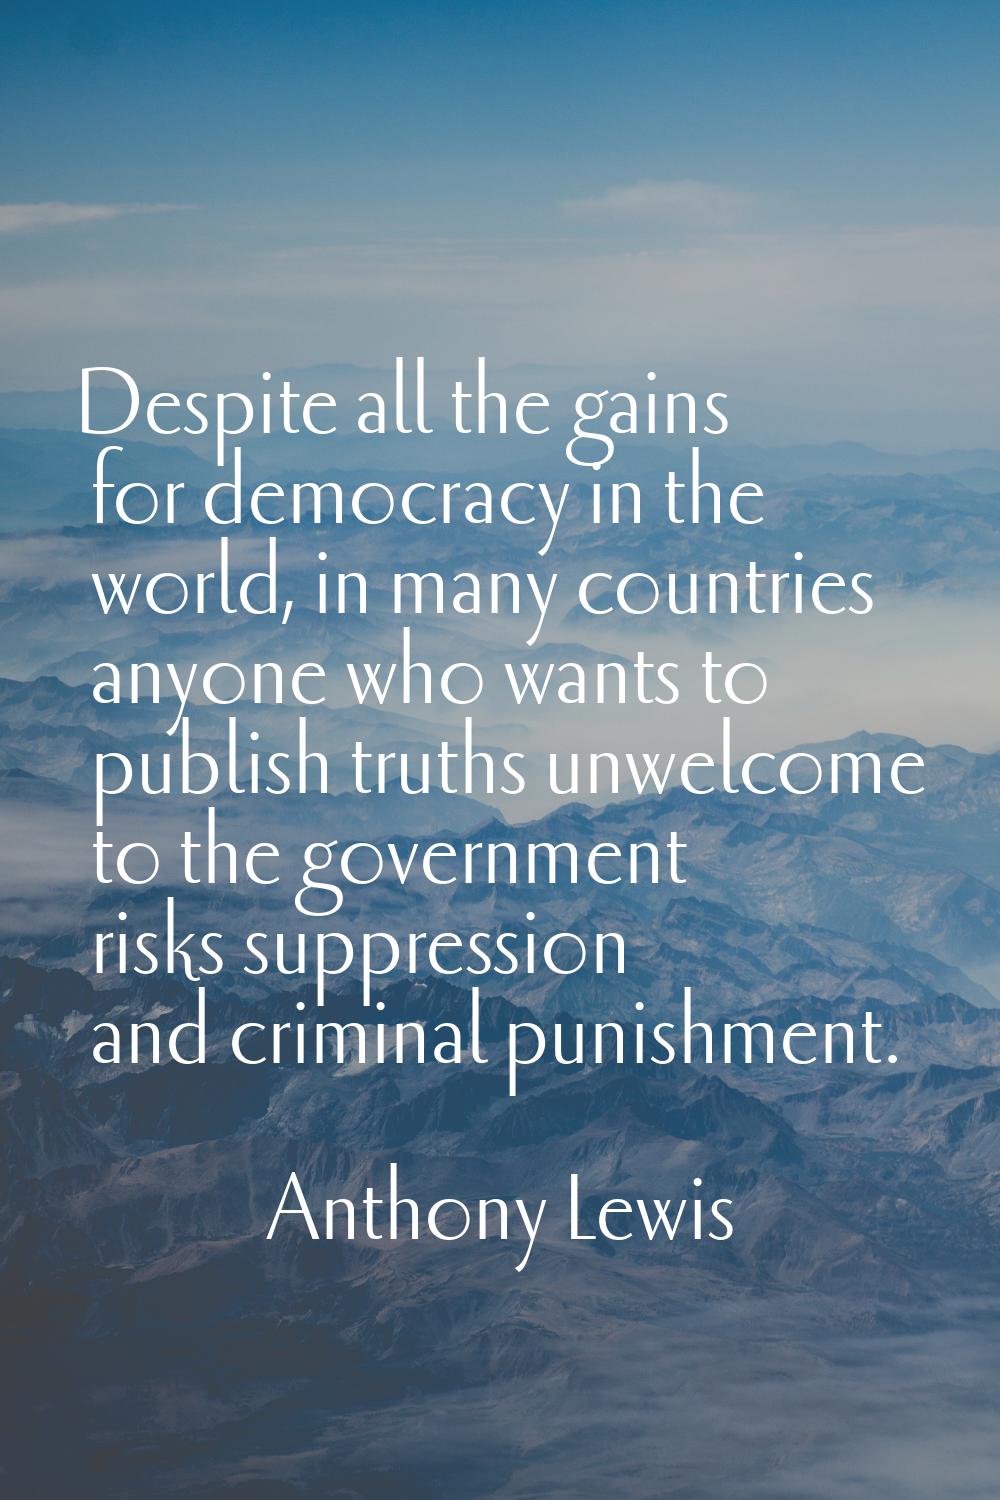 Despite all the gains for democracy in the world, in many countries anyone who wants to publish tru